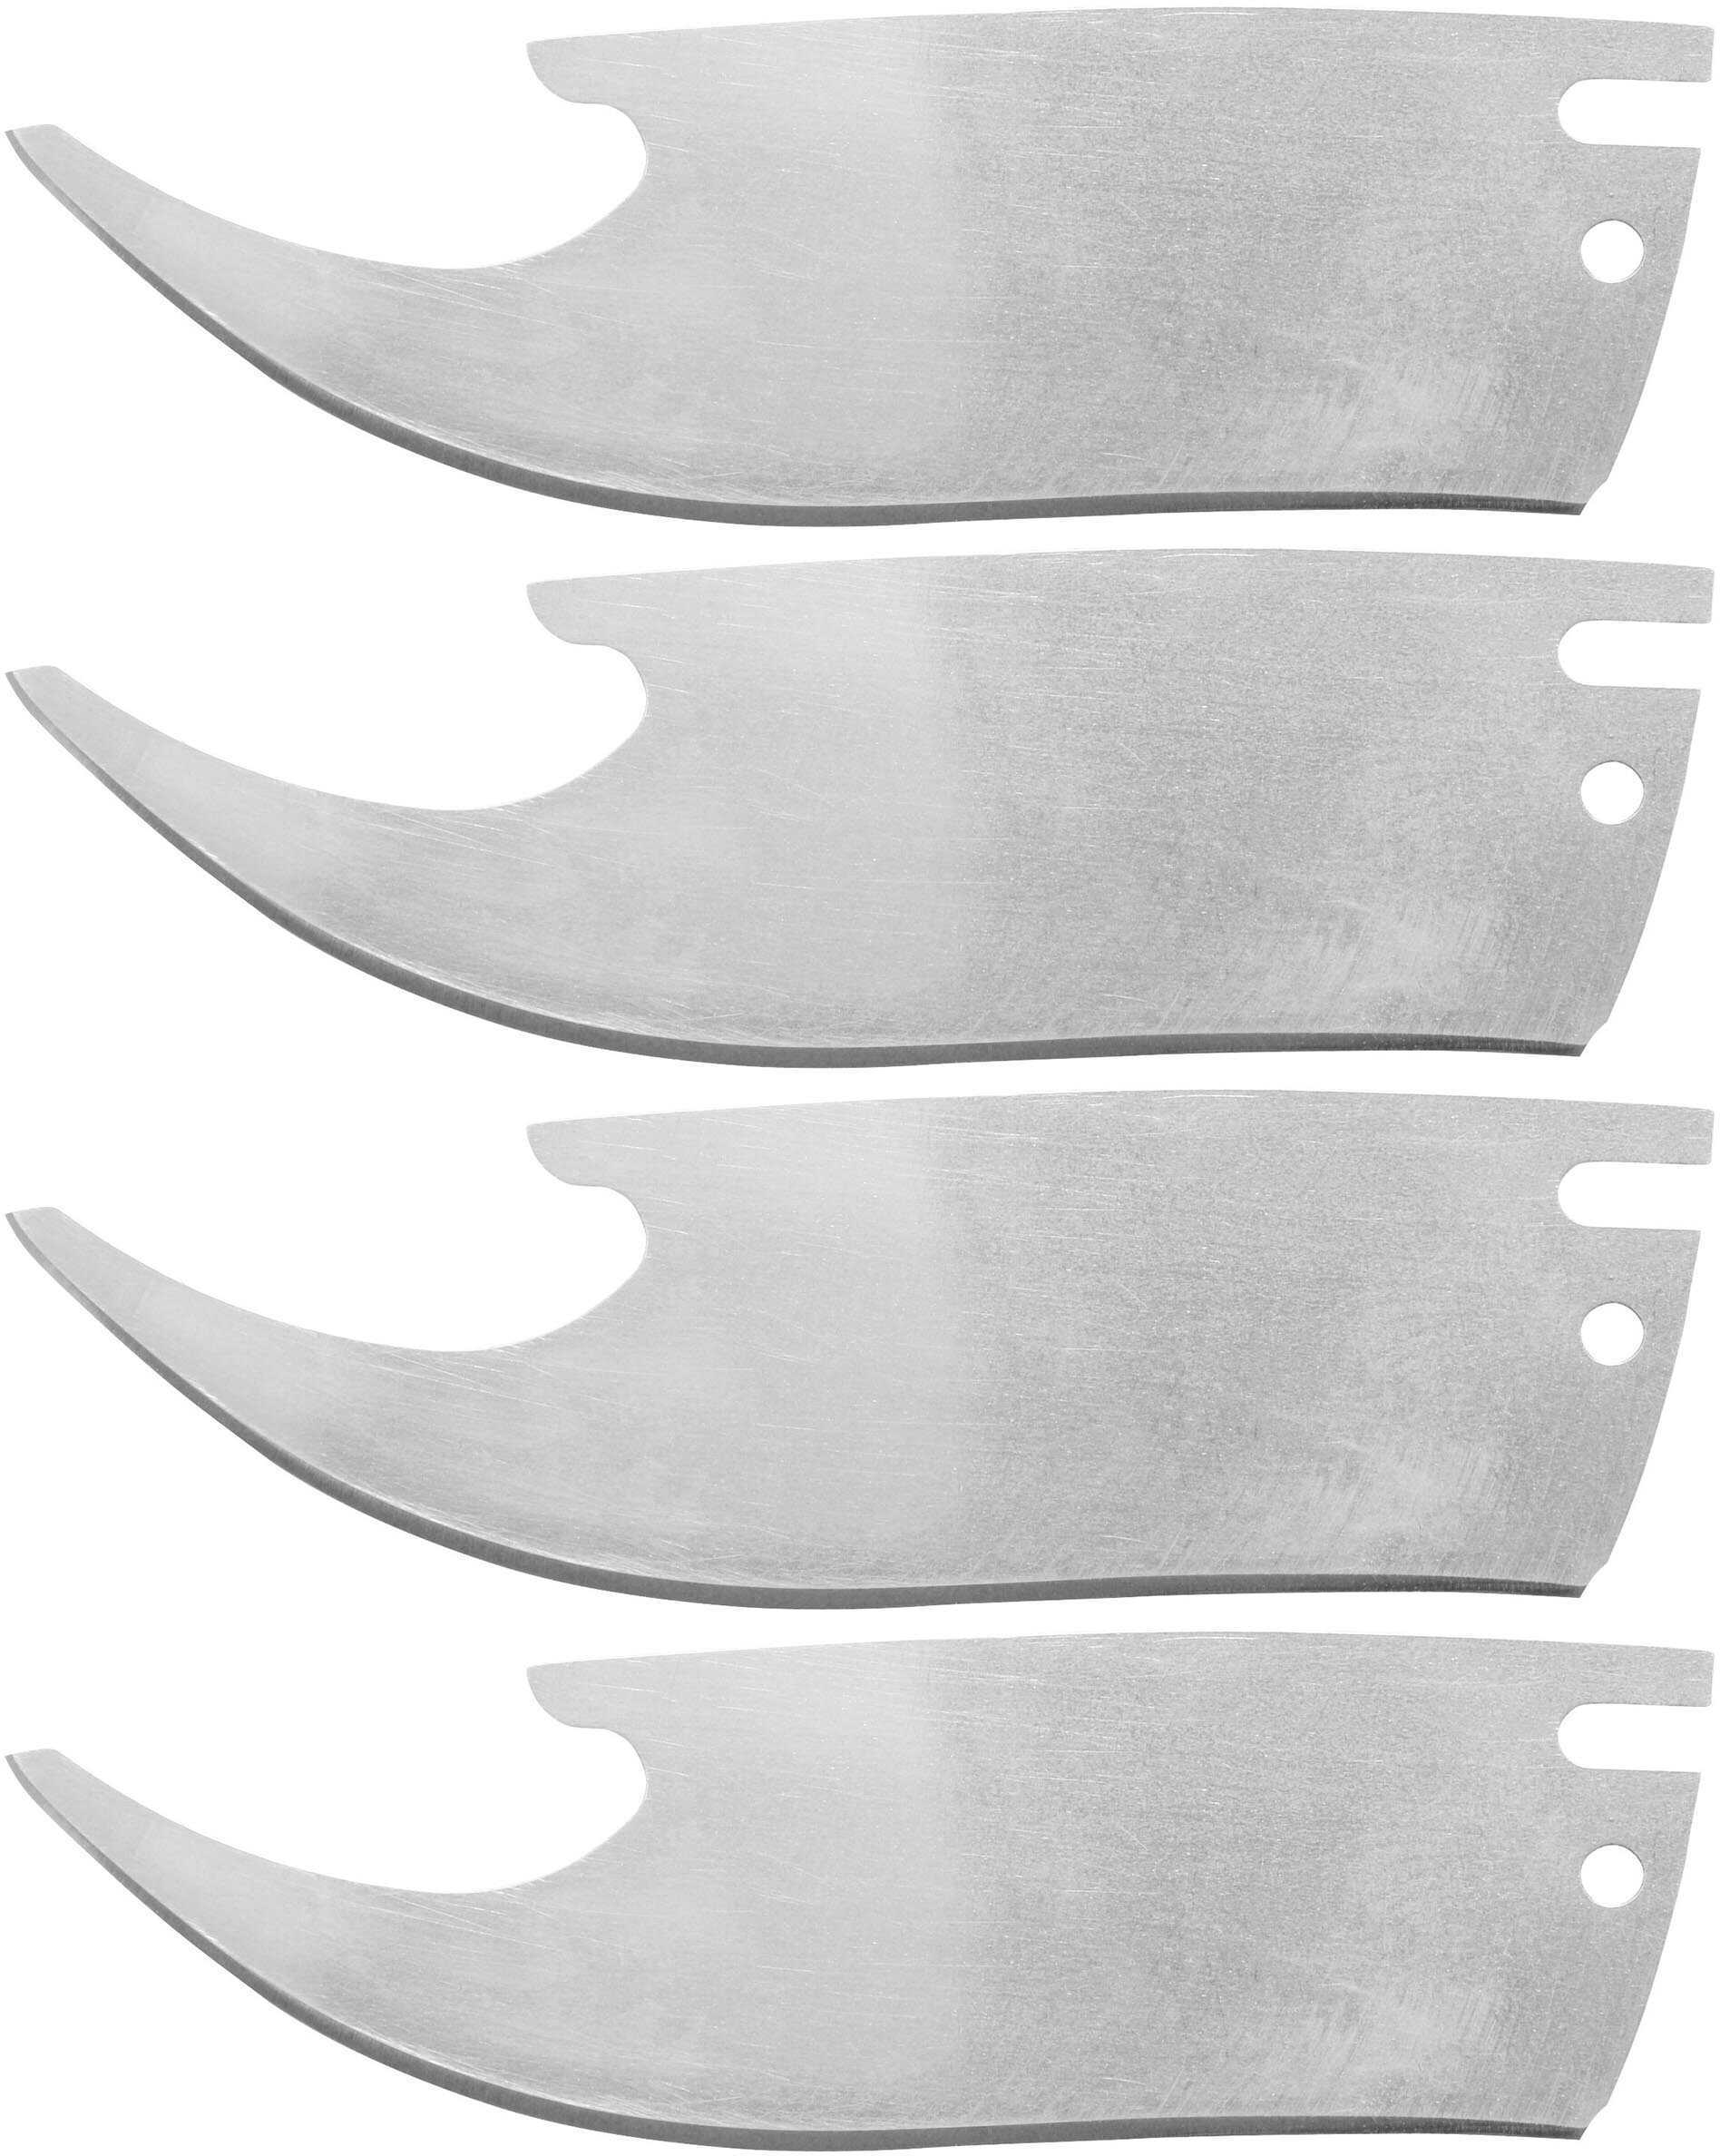 Camillus Tigersharp Replace Blade 4 Pack Straight for 19132